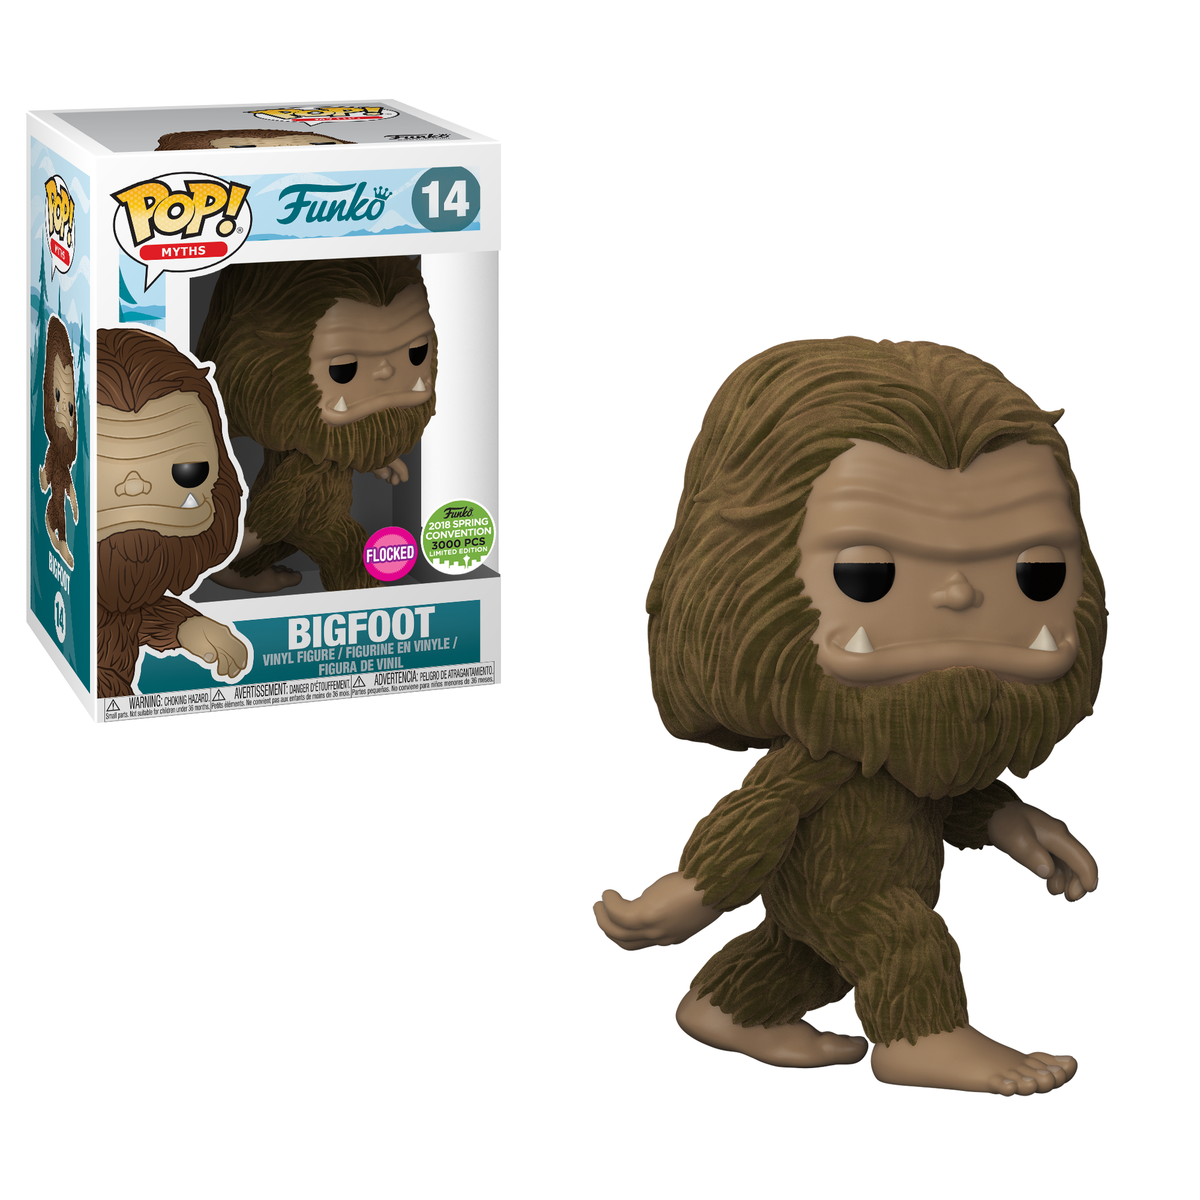 RT & follow @OriginalFunko for the chance to win an #ECCC 2018 exclusive FLOCKED Bigfoot Pop!